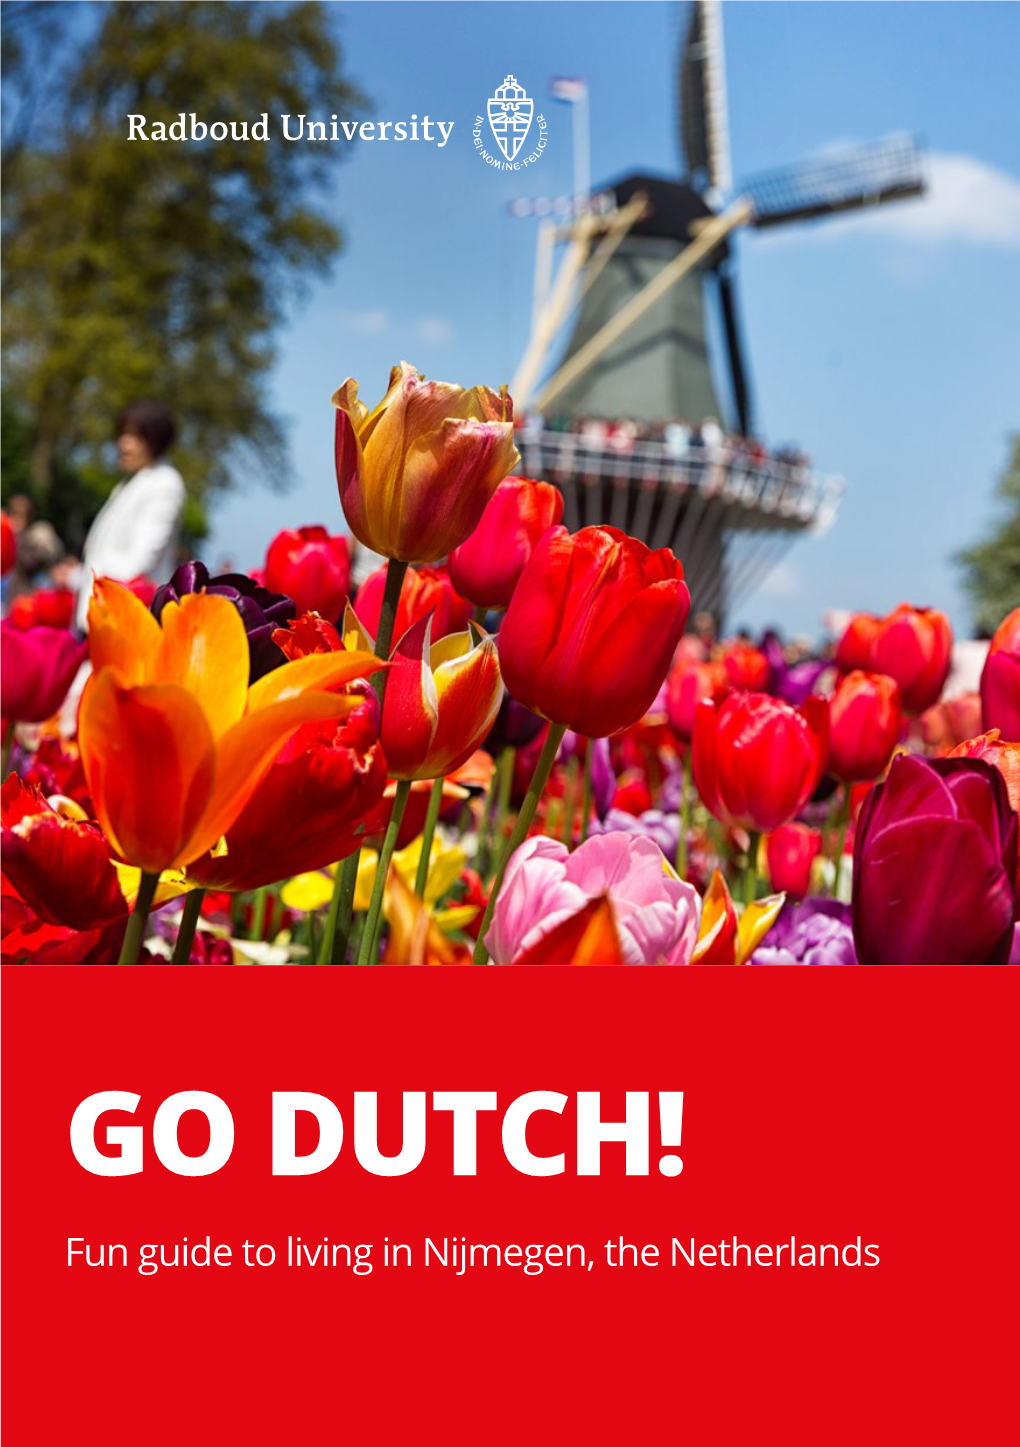 GO DUTCH! Fun Guide to Living in Nijmegen, the Netherlands “One of My Favourite Things to Do in the City Centre Is Walking the Green Line That Runs Through the City